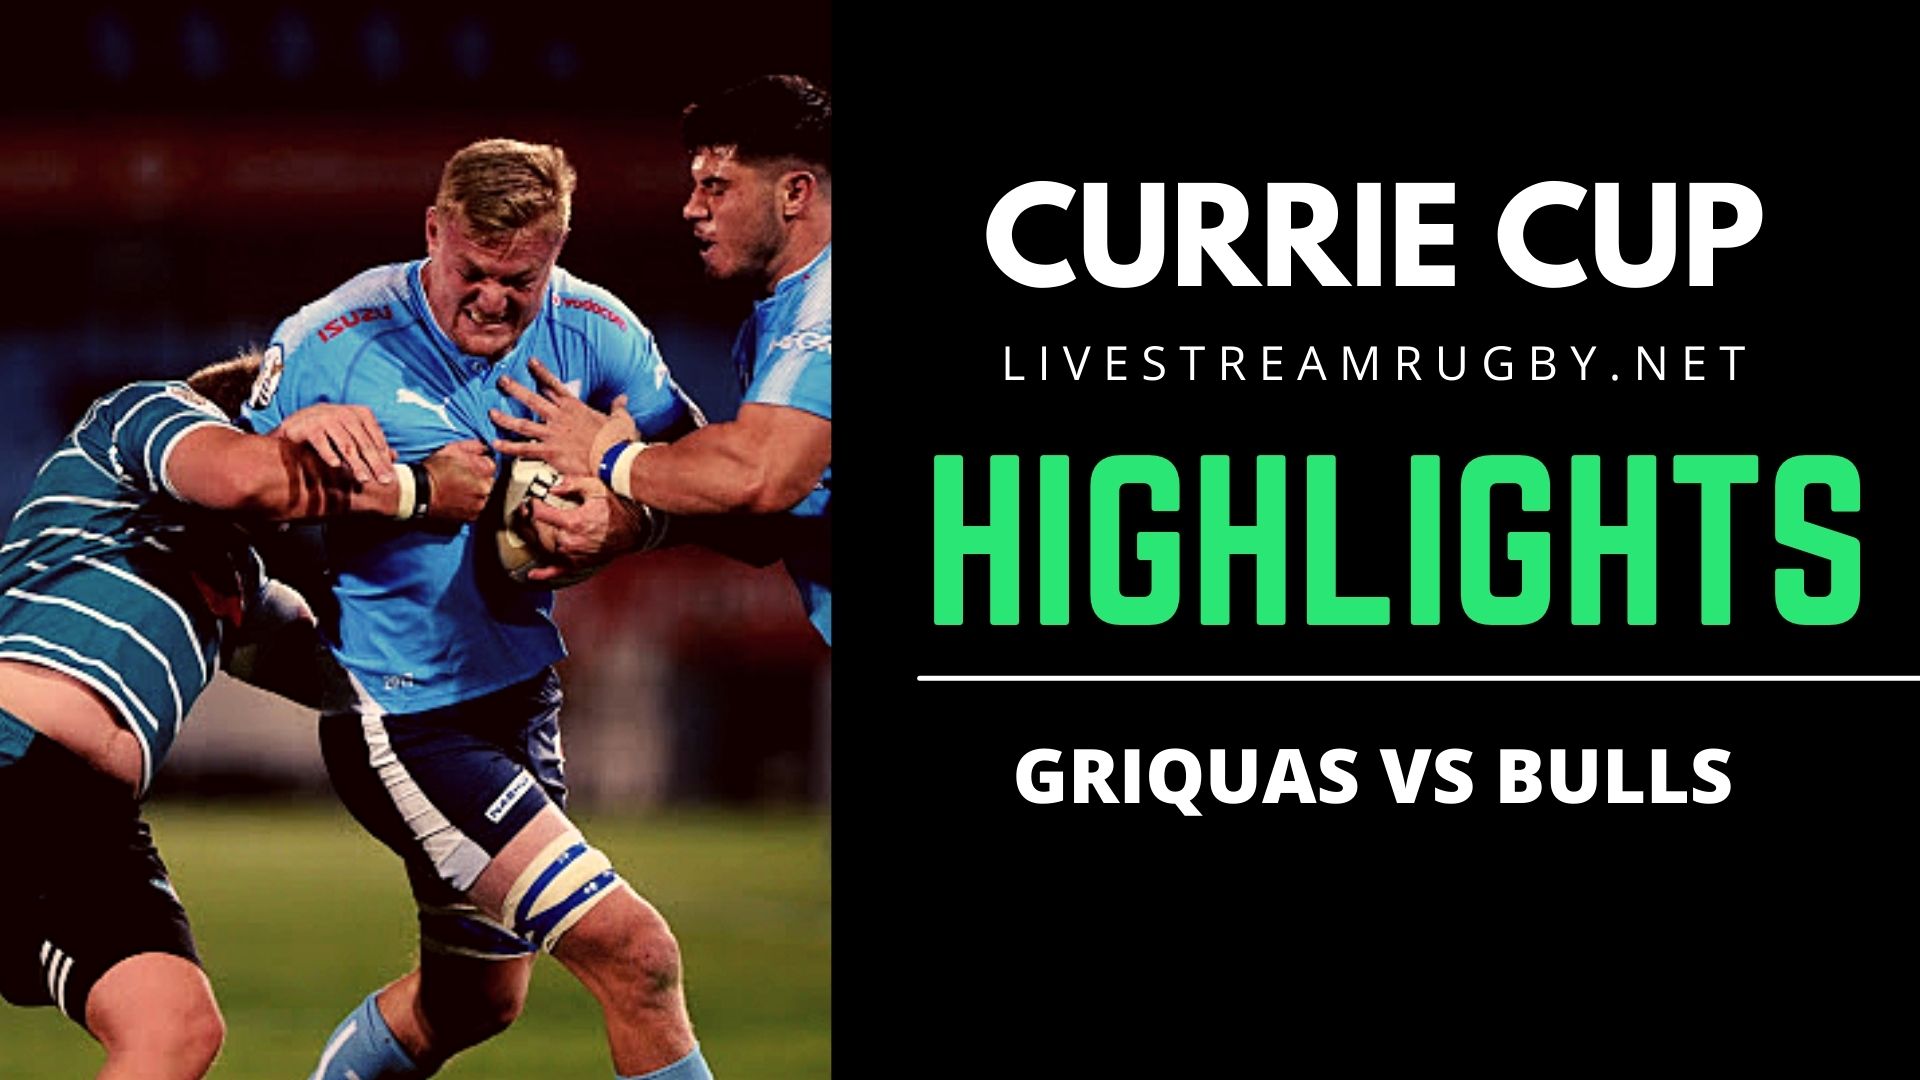 Griquas Vs Bulls Rd 5 Highlights 2022 Currie Cup